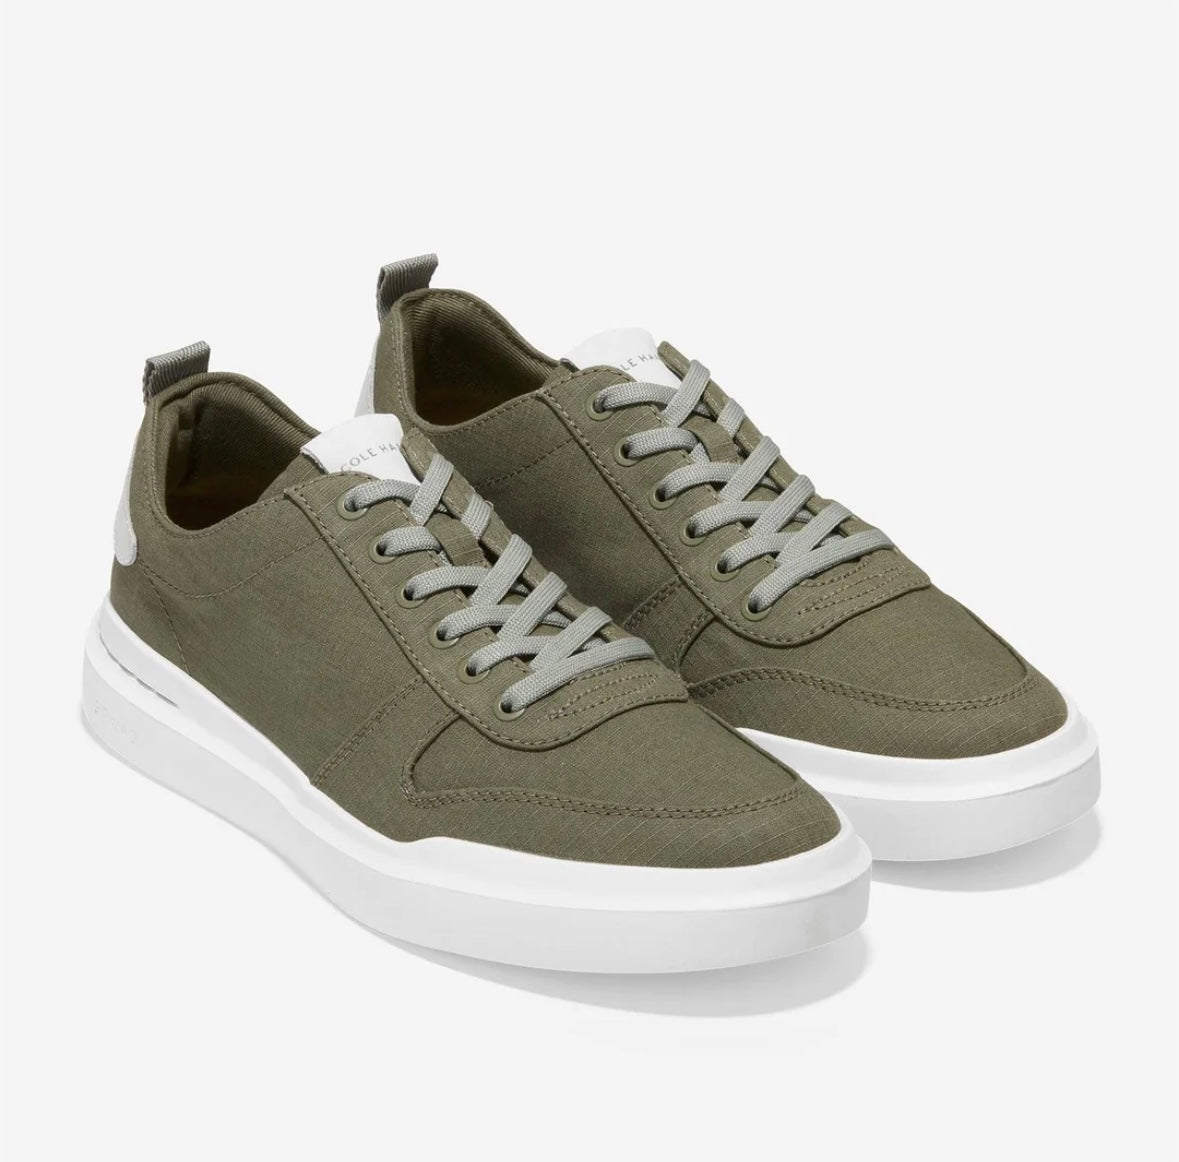 Cole Haan GrandPro Rally Canvas sneakers - Dusty Olive